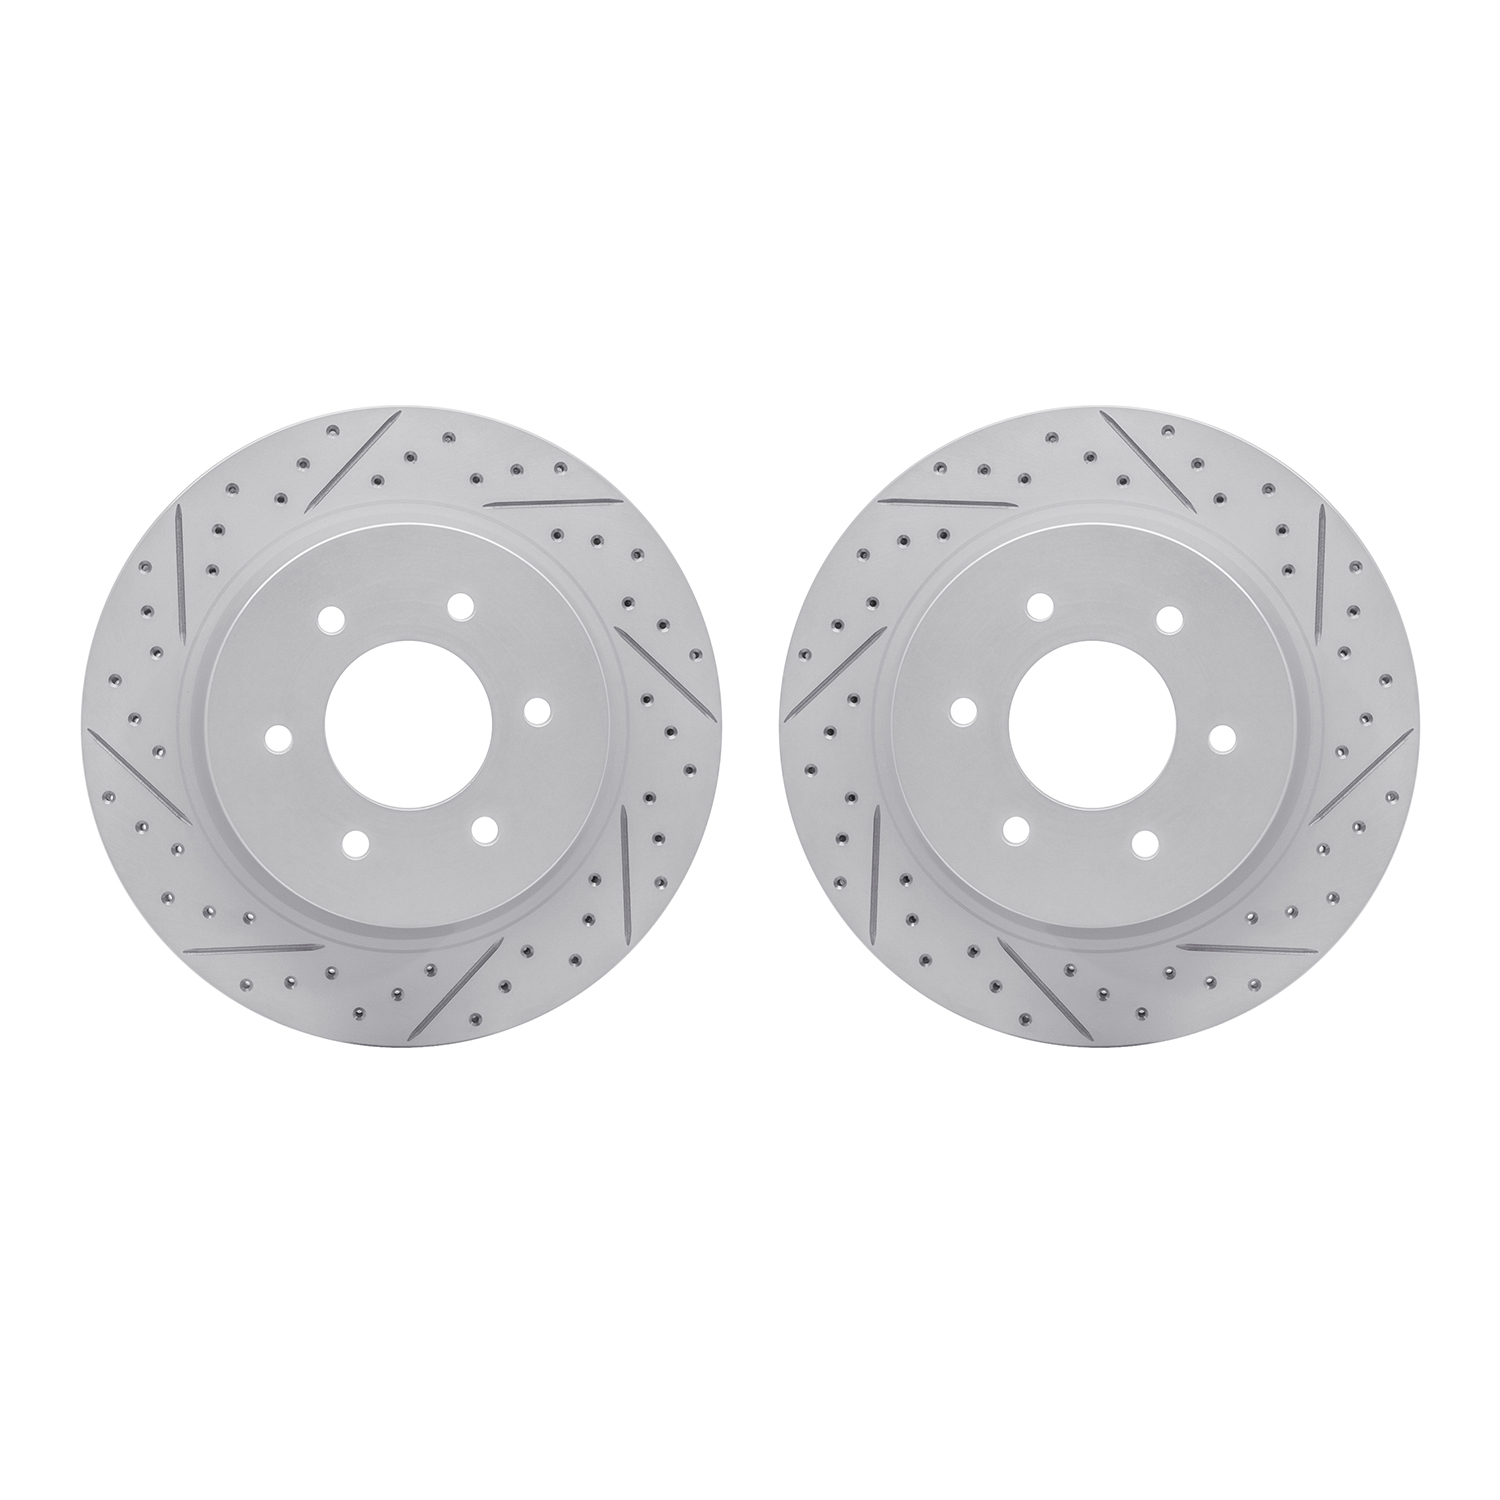 2002-67042 Geoperformance Drilled/Slotted Brake Rotors, Fits Select Infiniti/Nissan, Position: Front